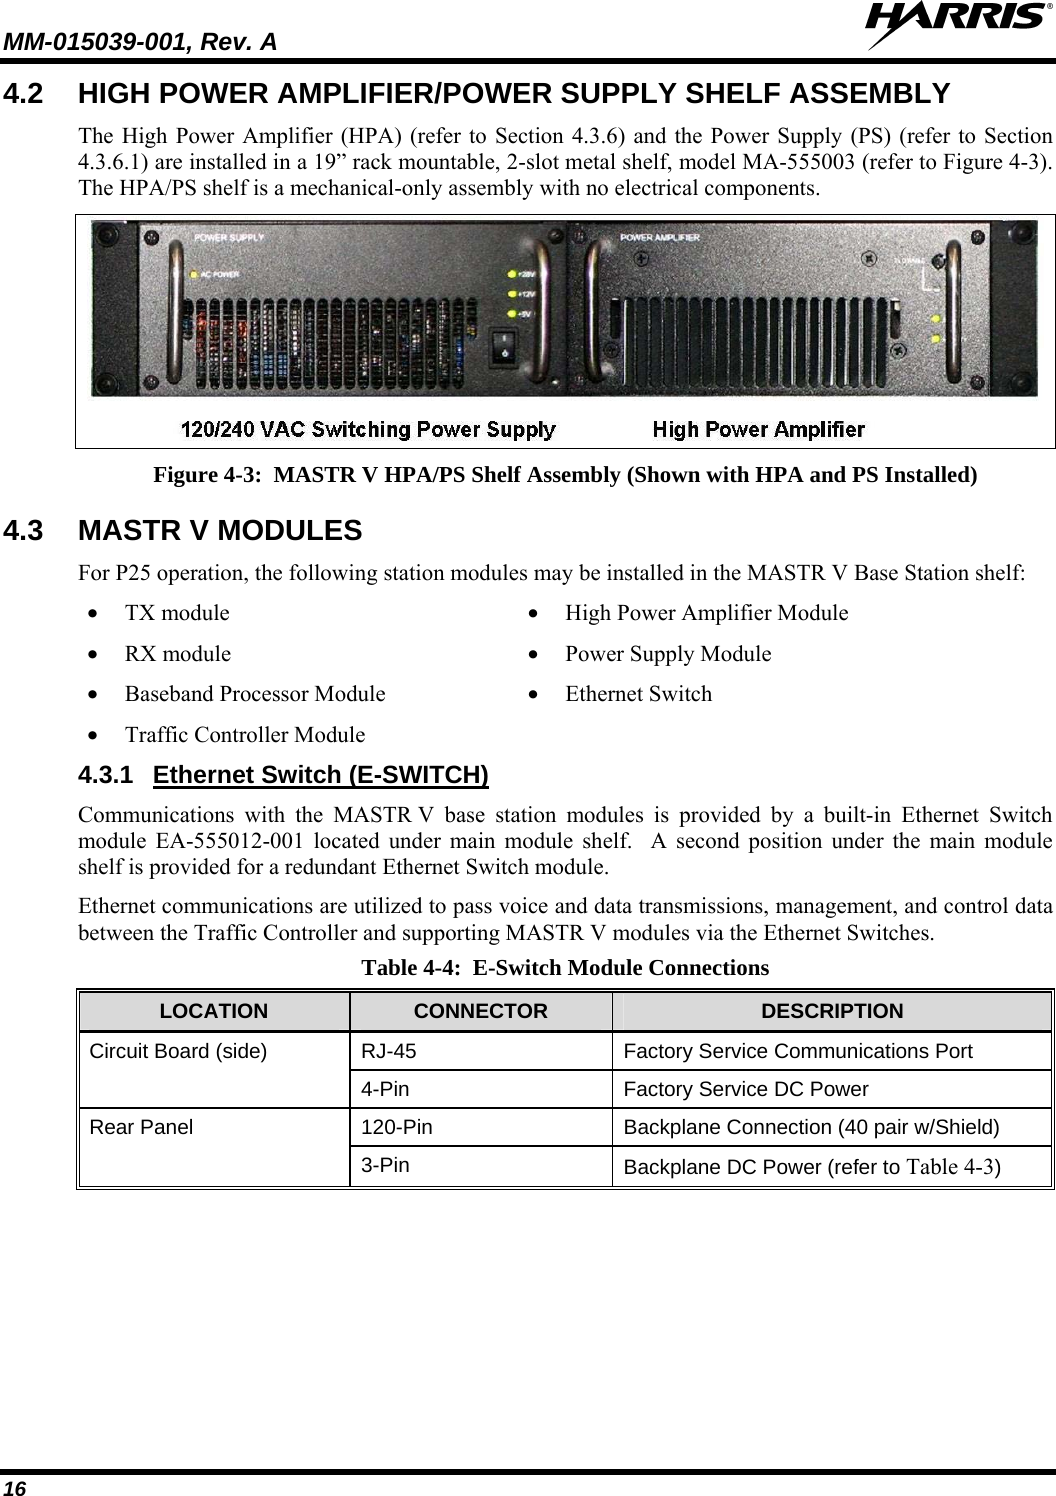 MM-015039-001, Rev. A   16 4.2  HIGH POWER AMPLIFIER/POWER SUPPLY SHELF ASSEMBLY The High Power Amplifier (HPA) (refer to Section 4.3.6) and the Power Supply (PS) (refer to Section 4.3.6.1) are installed in a 19” rack mountable, 2-slot metal shelf, model MA-555003 (refer to Figure 4-3).  The HPA/PS shelf is a mechanical-only assembly with no electrical components.  Figure 4-3:  MASTR V HPA/PS Shelf Assembly (Shown with HPA and PS Installed) 4.3 MASTR V MODULES For P25 operation, the following station modules may be installed in the MASTR V Base Station shelf: • TX module • RX module • Baseband Processor Module • Traffic Controller Module • High Power Amplifier Module • Power Supply Module • Ethernet Switch 4.3.1 Ethernet Switch (E-SWITCH) Communications with the MASTR V base station modules is provided by a built-in Ethernet Switch module EA-555012-001 located under main module shelf.  A second position under the main module shelf is provided for a redundant Ethernet Switch module. Ethernet communications are utilized to pass voice and data transmissions, management, and control data between the Traffic Controller and supporting MASTR V modules via the Ethernet Switches.   Table 4-4:  E-Switch Module Connections LOCATION  CONNECTOR   DESCRIPTION RJ-45  Factory Service Communications Port Circuit Board (side) 4-Pin  Factory Service DC Power  120-Pin  Backplane Connection (40 pair w/Shield) Rear Panel 3-Pin  Backplane DC Power (refer to Table 4-3)  